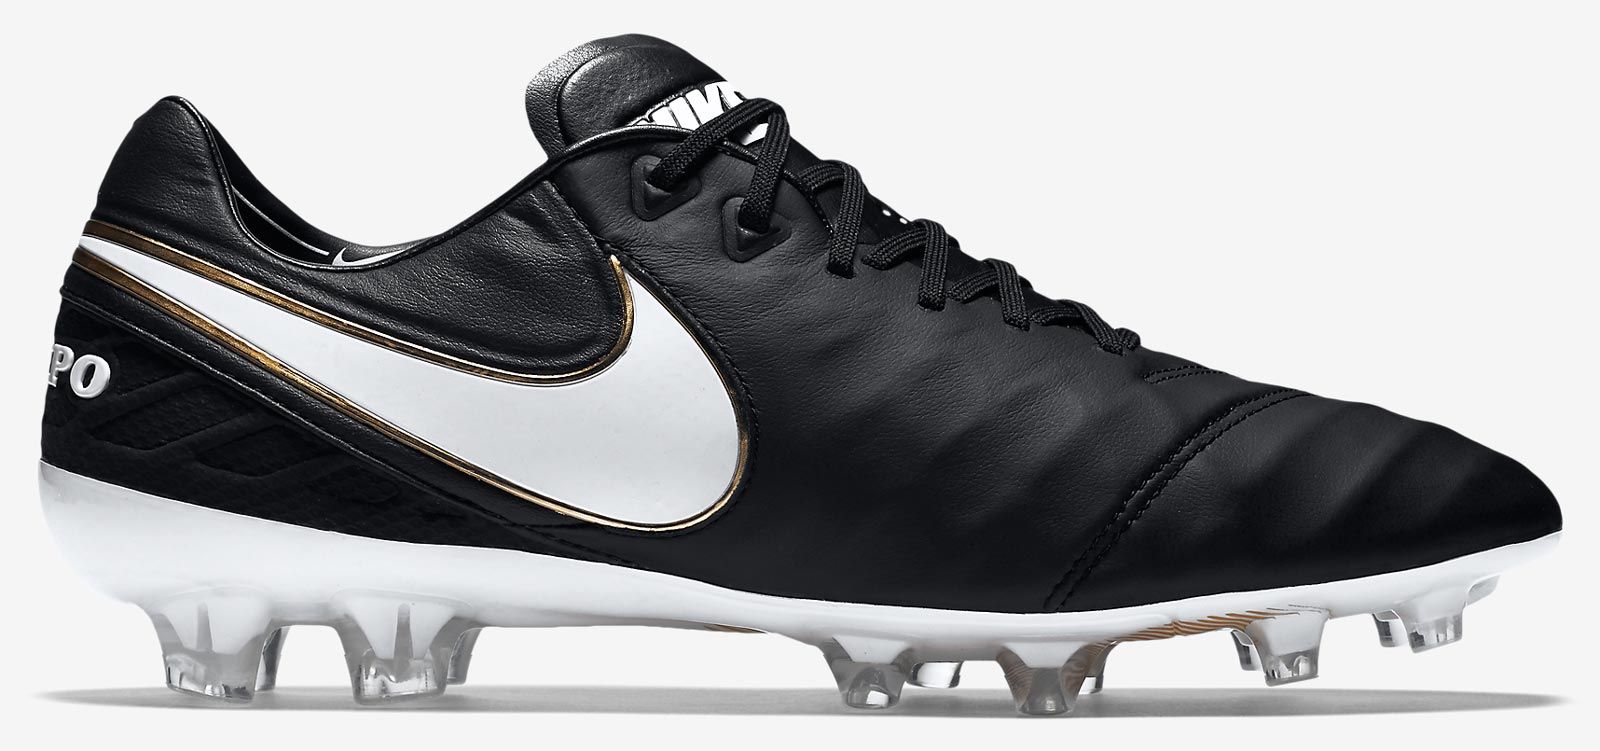 Nike Tiempo Legend 6 2016 'Tech Craft Pack' Boots Released - Footy Headlines